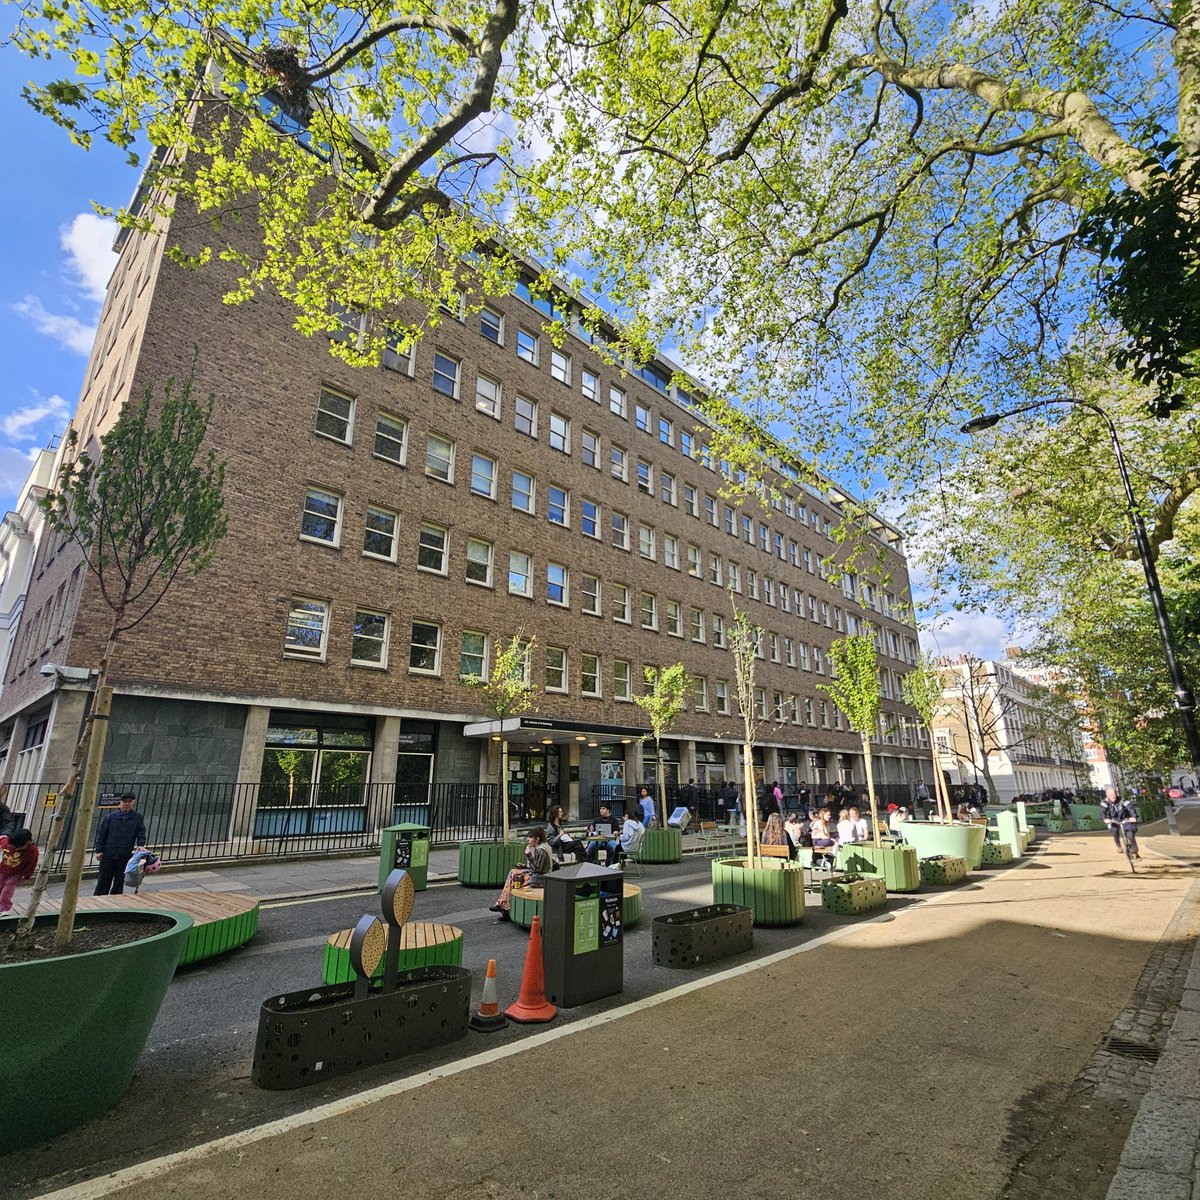 The @UCLarchaeology this evening. Warm May Eve sunshine and the new @ucl pedestrianised social area outside full of students and staff.